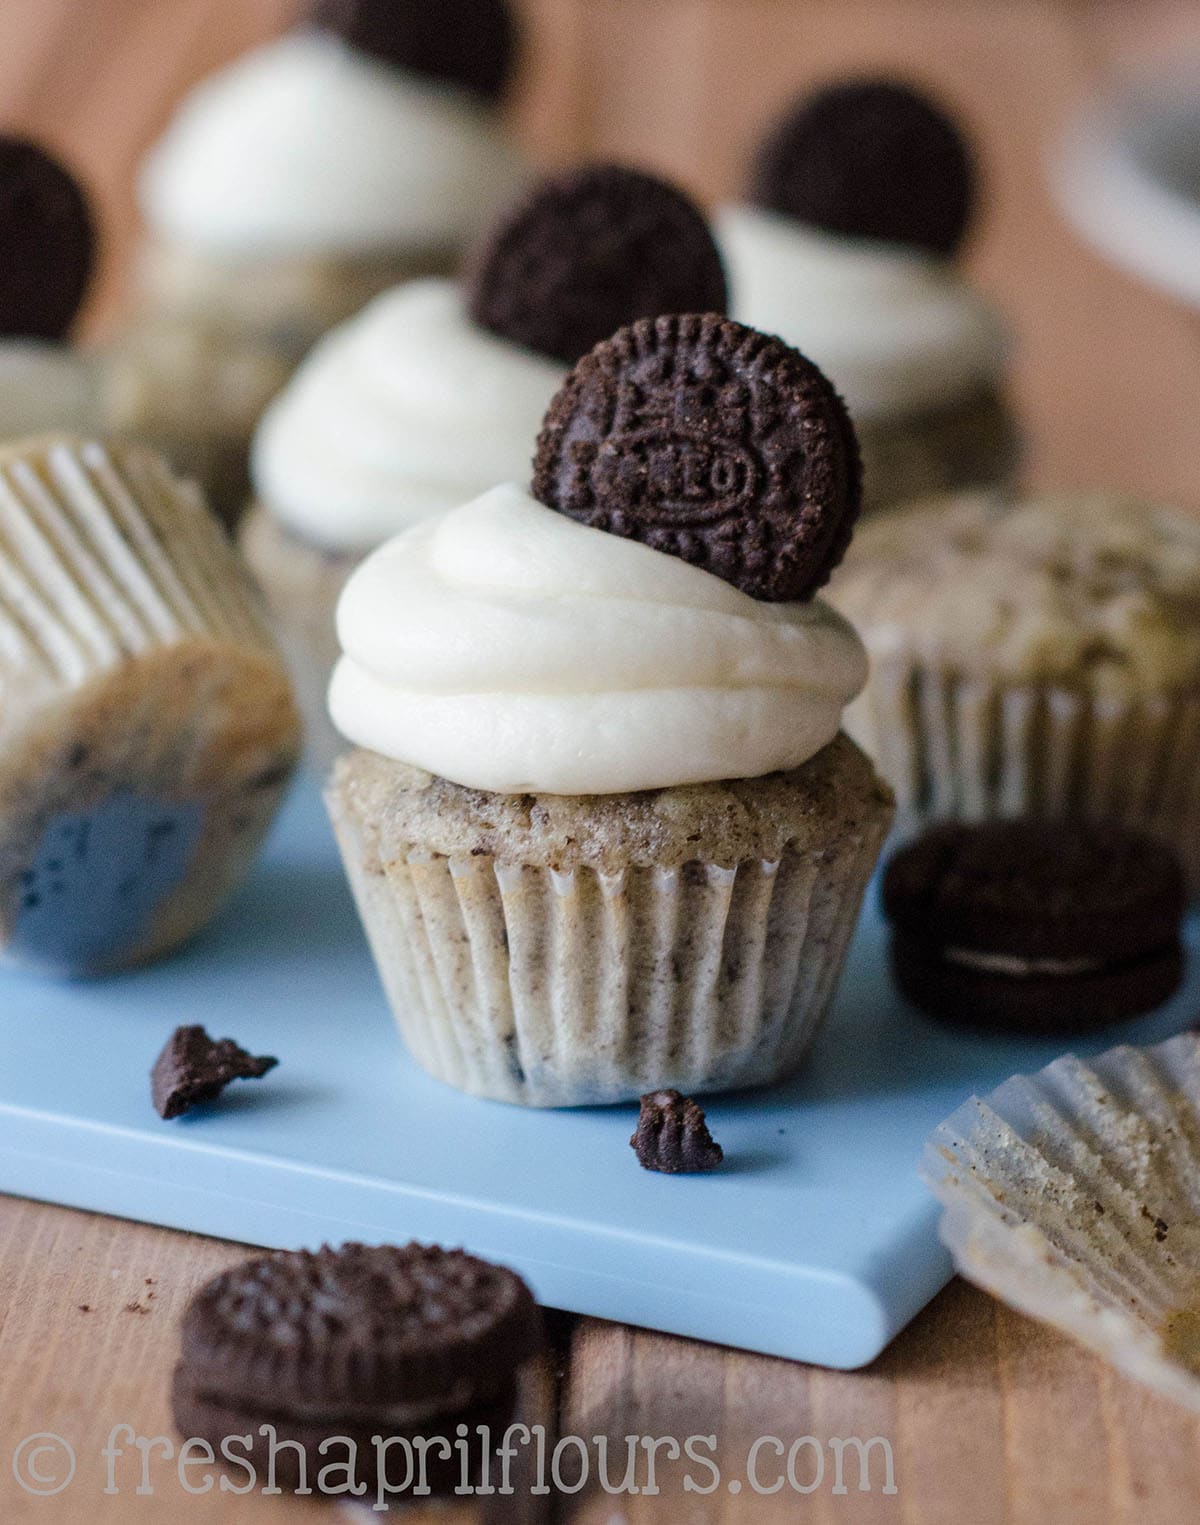 Mini Cookies & Cream Cupcakes: Mini vanilla cupcakes filled with crushed Oreos, and topped with creamy vanilla buttercream. Plus, a mini Oreo at the bottom of each one! Instructions for standard cupcakes and layer cake included as well.